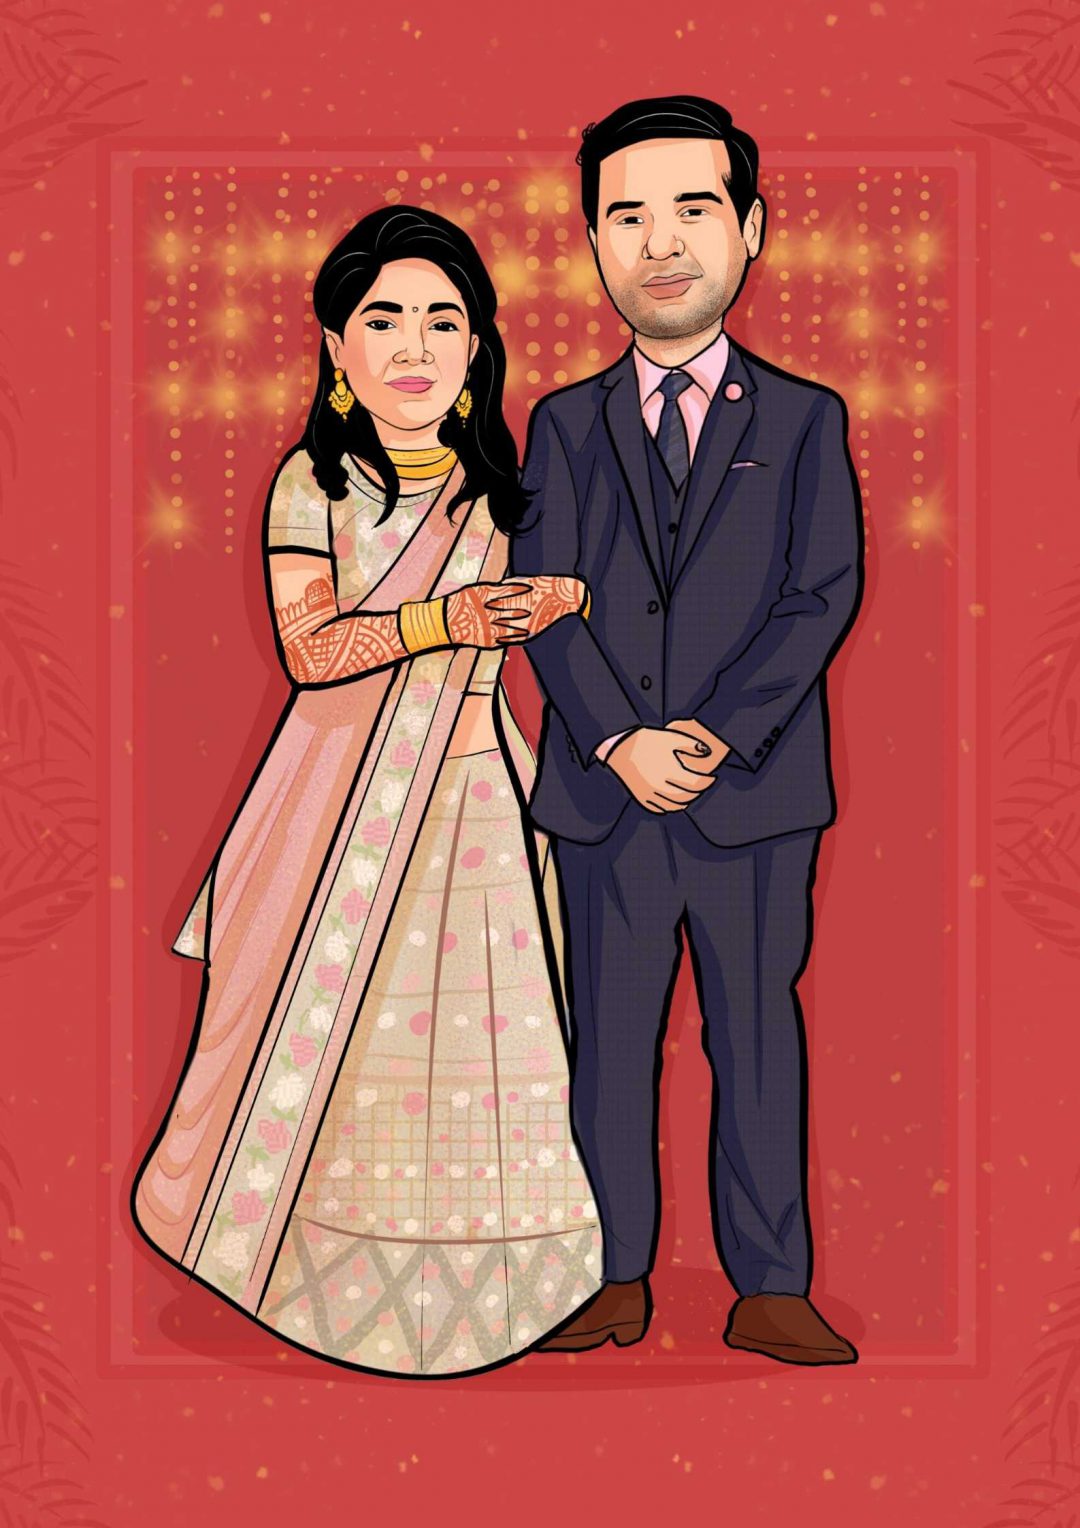 Wedding caricature - Gifts for couples